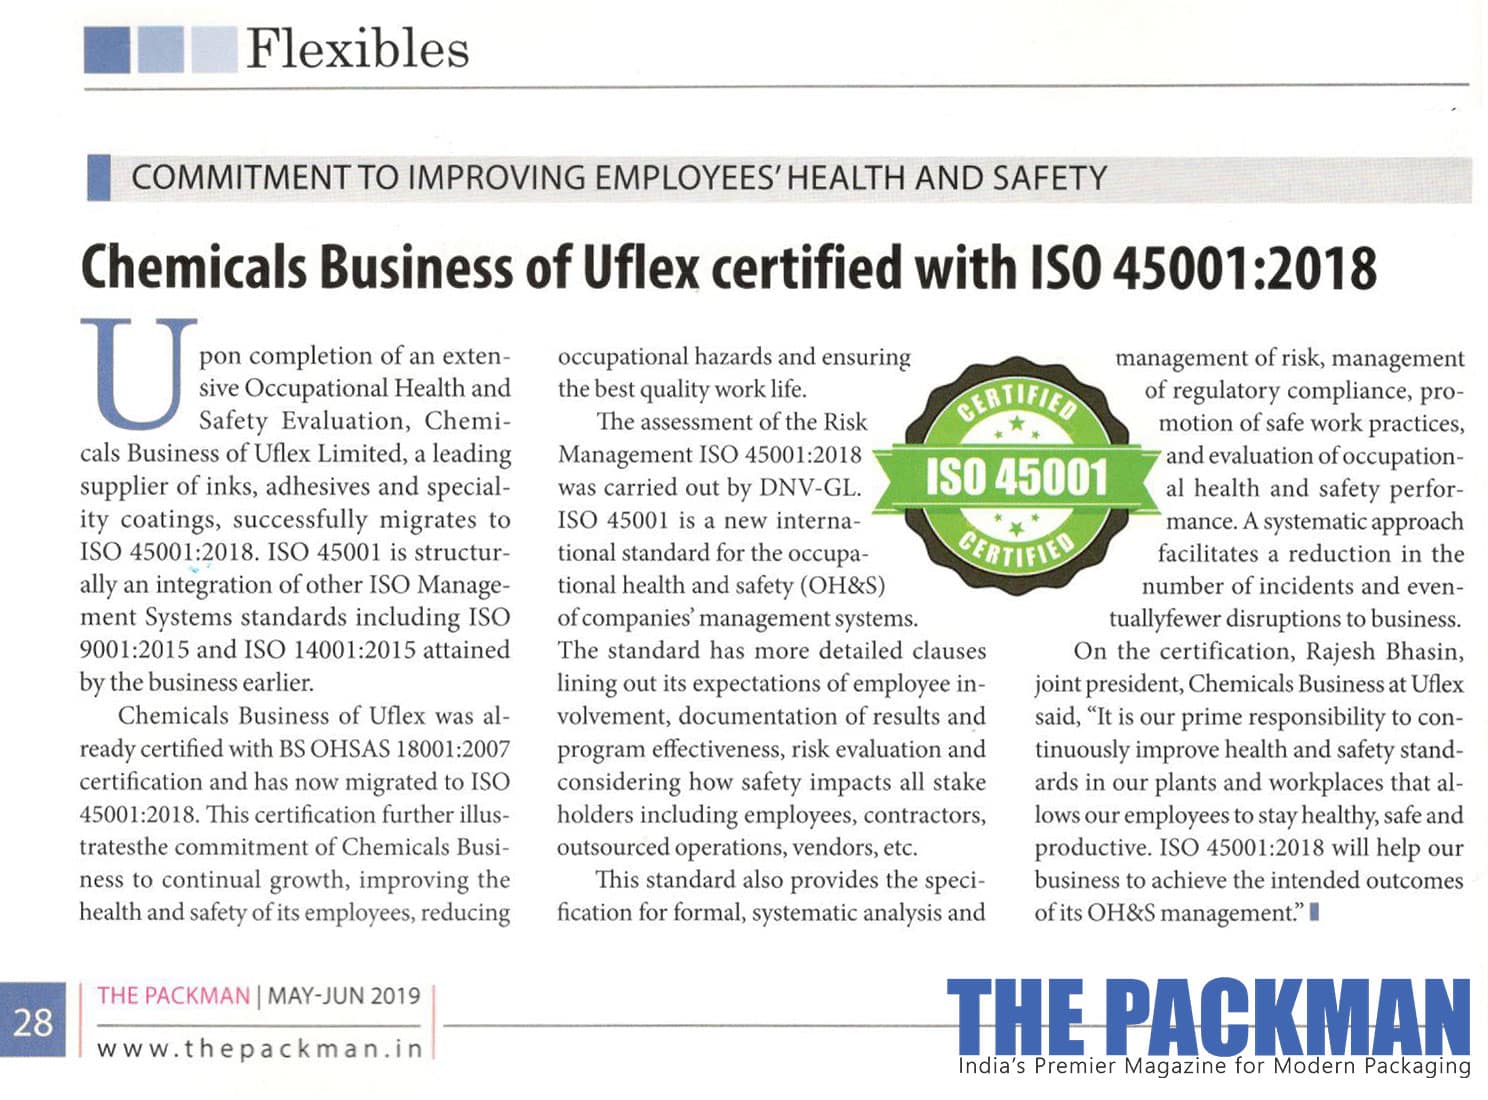 Chemicals Business of UFlex Certified with “ISO 45001:2018” – Reports The Packman | May June 2019 Print Edition